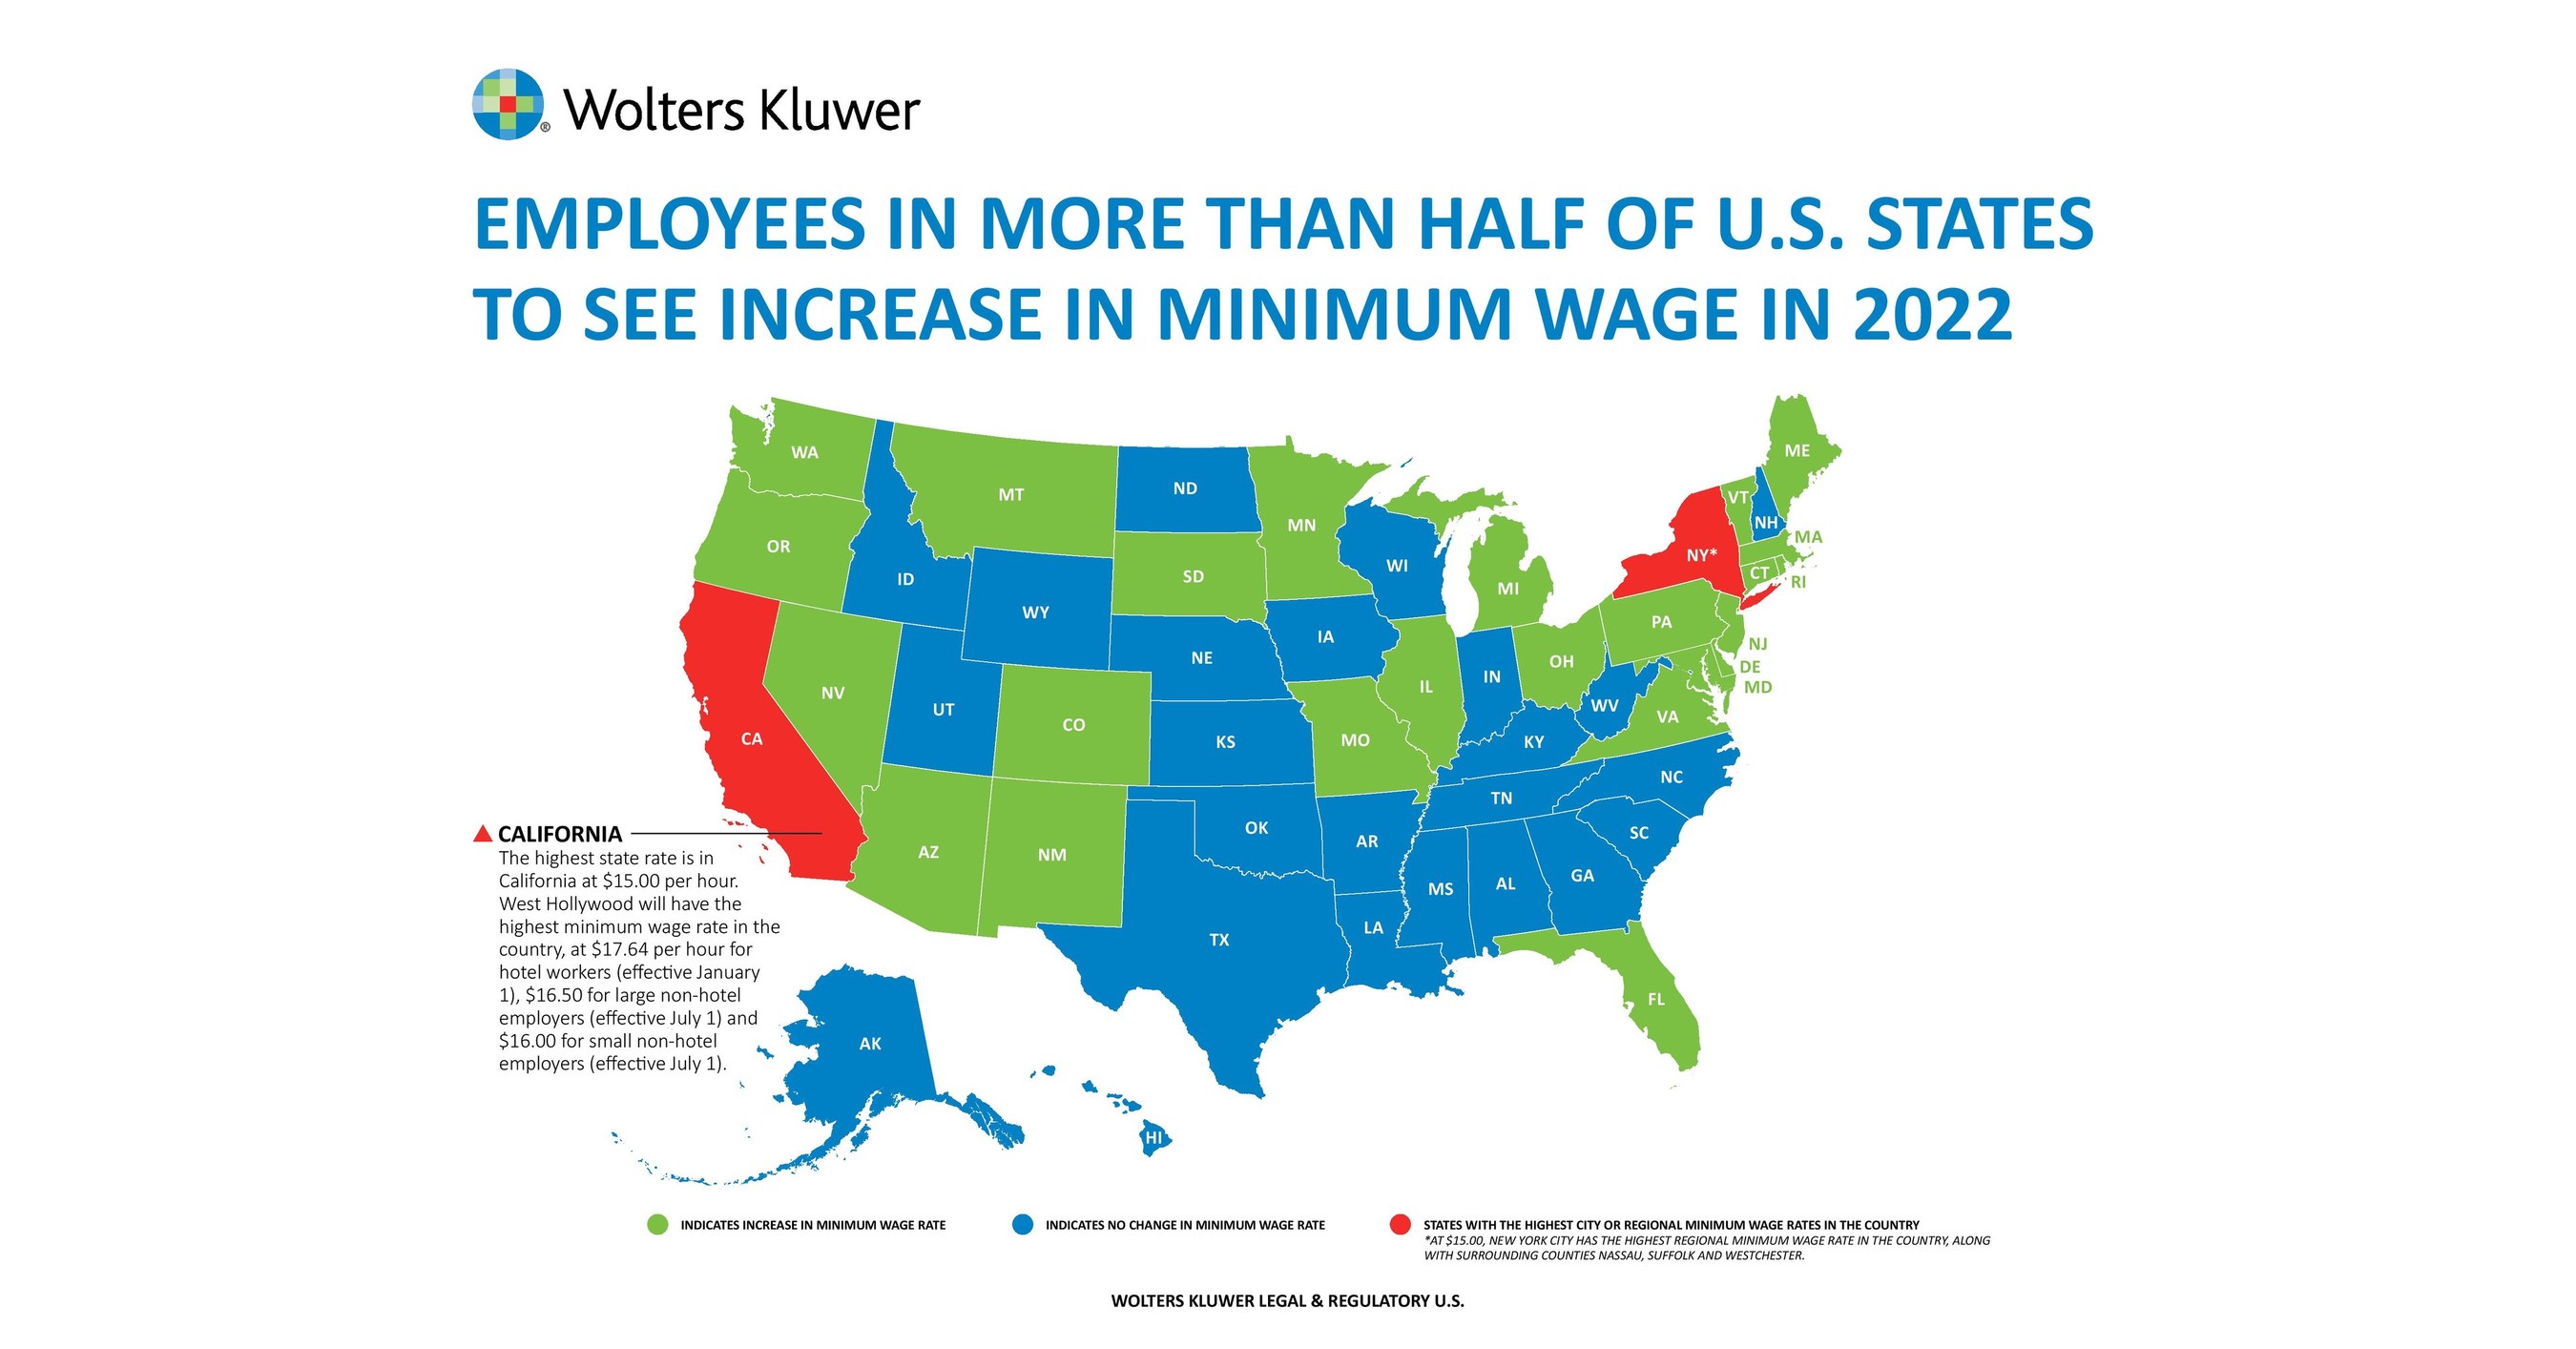 More than Half of U.S. States to Institute a Minimum Wage Increase in 2022